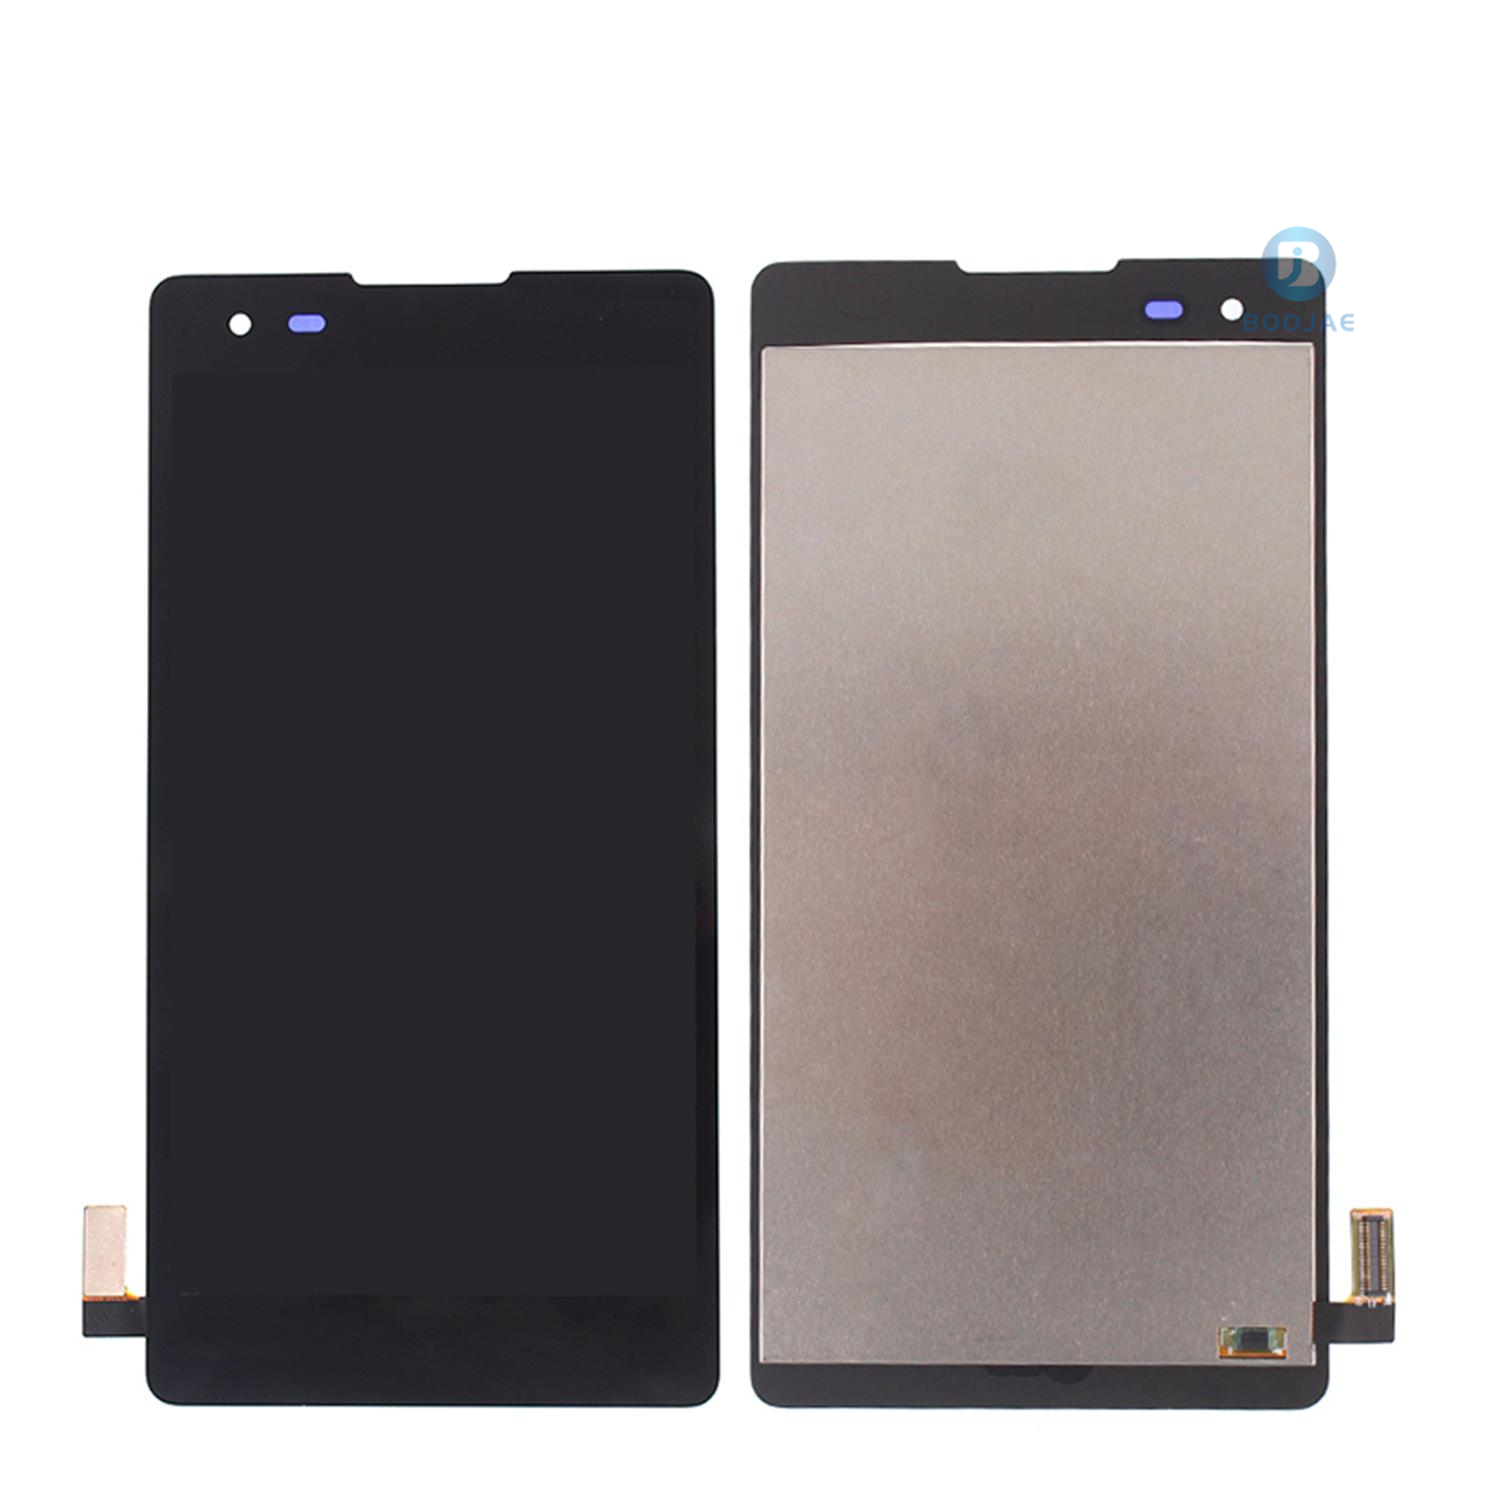 For LG K6 LCD Screen Display and Touch Panel Digitizer Assembly Replacement